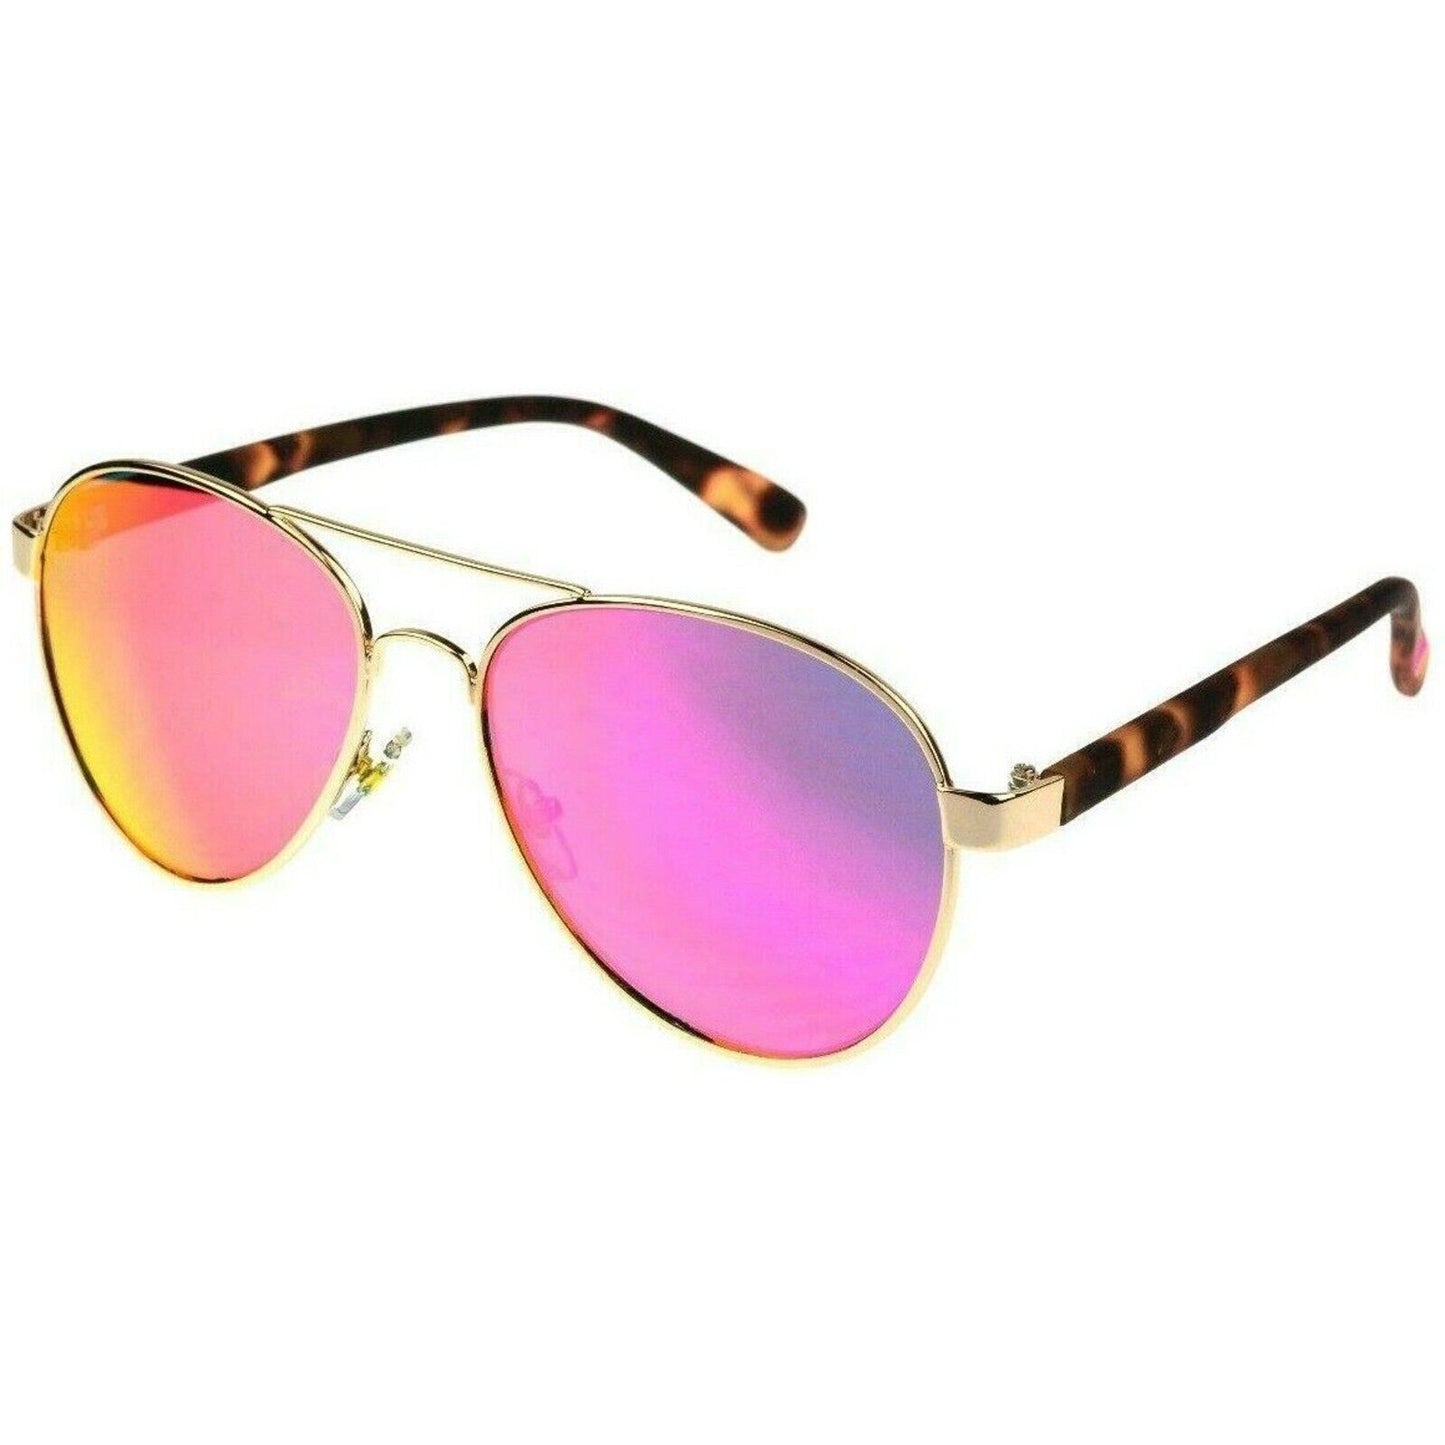 Foster Grant Shape AFH 10 Gold Aviator Sunglasses - side view